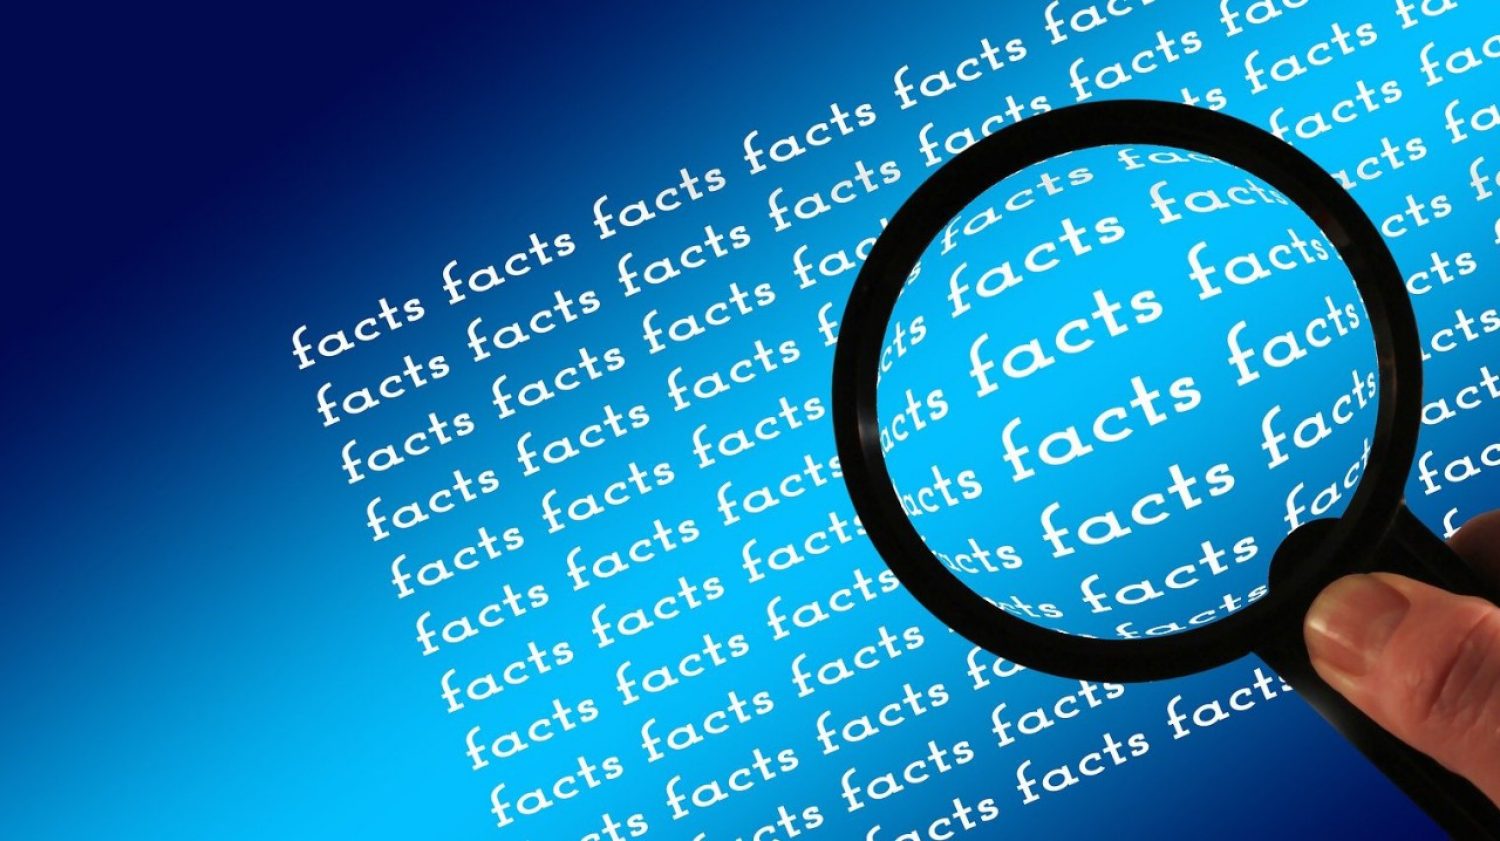 the word 'facts' repeated, viewed through a magnifying glass